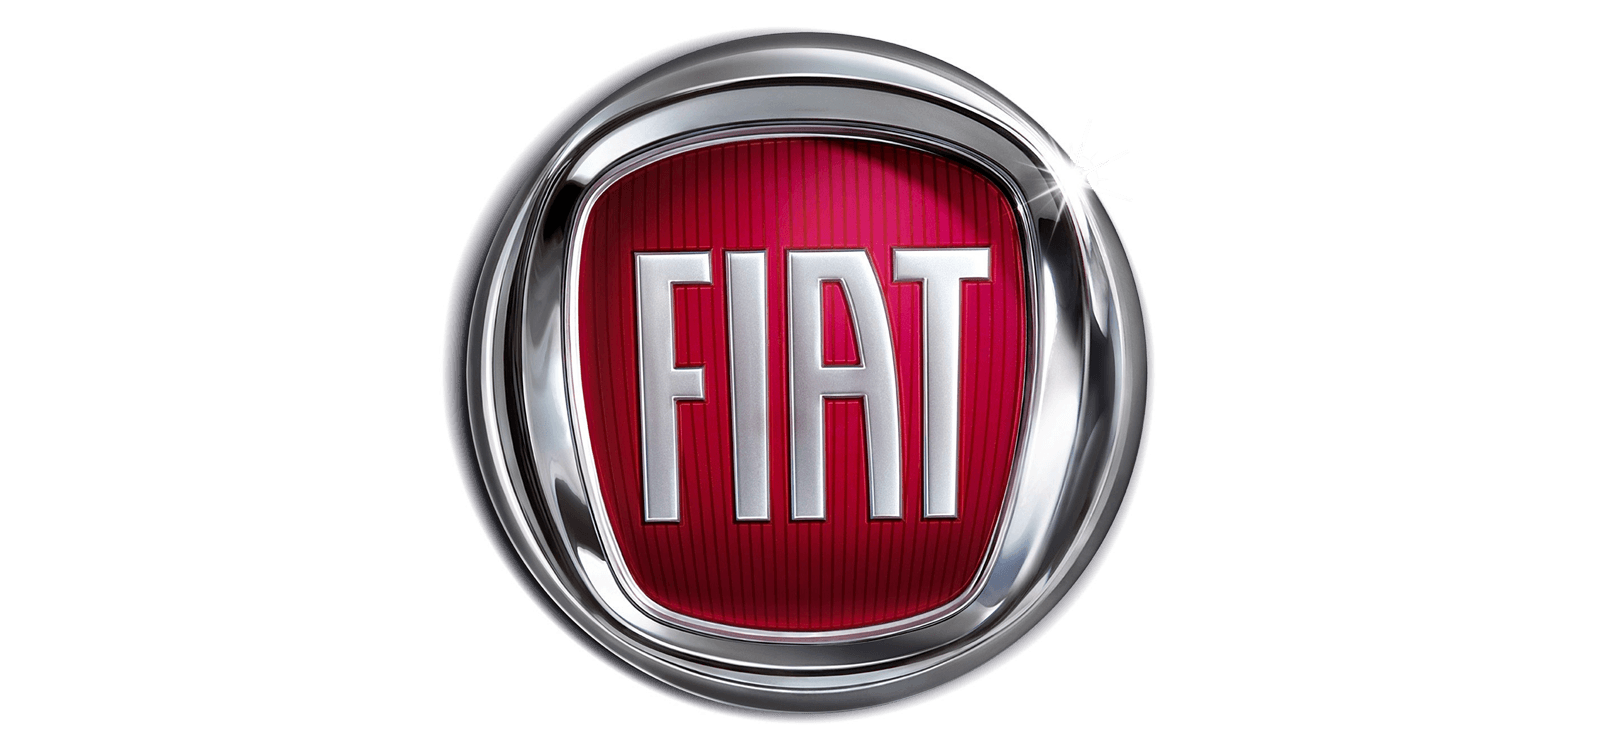 Red Fiat Logo - Fiat Logo Meaning and History. Symbol Fiat | World Cars Brands